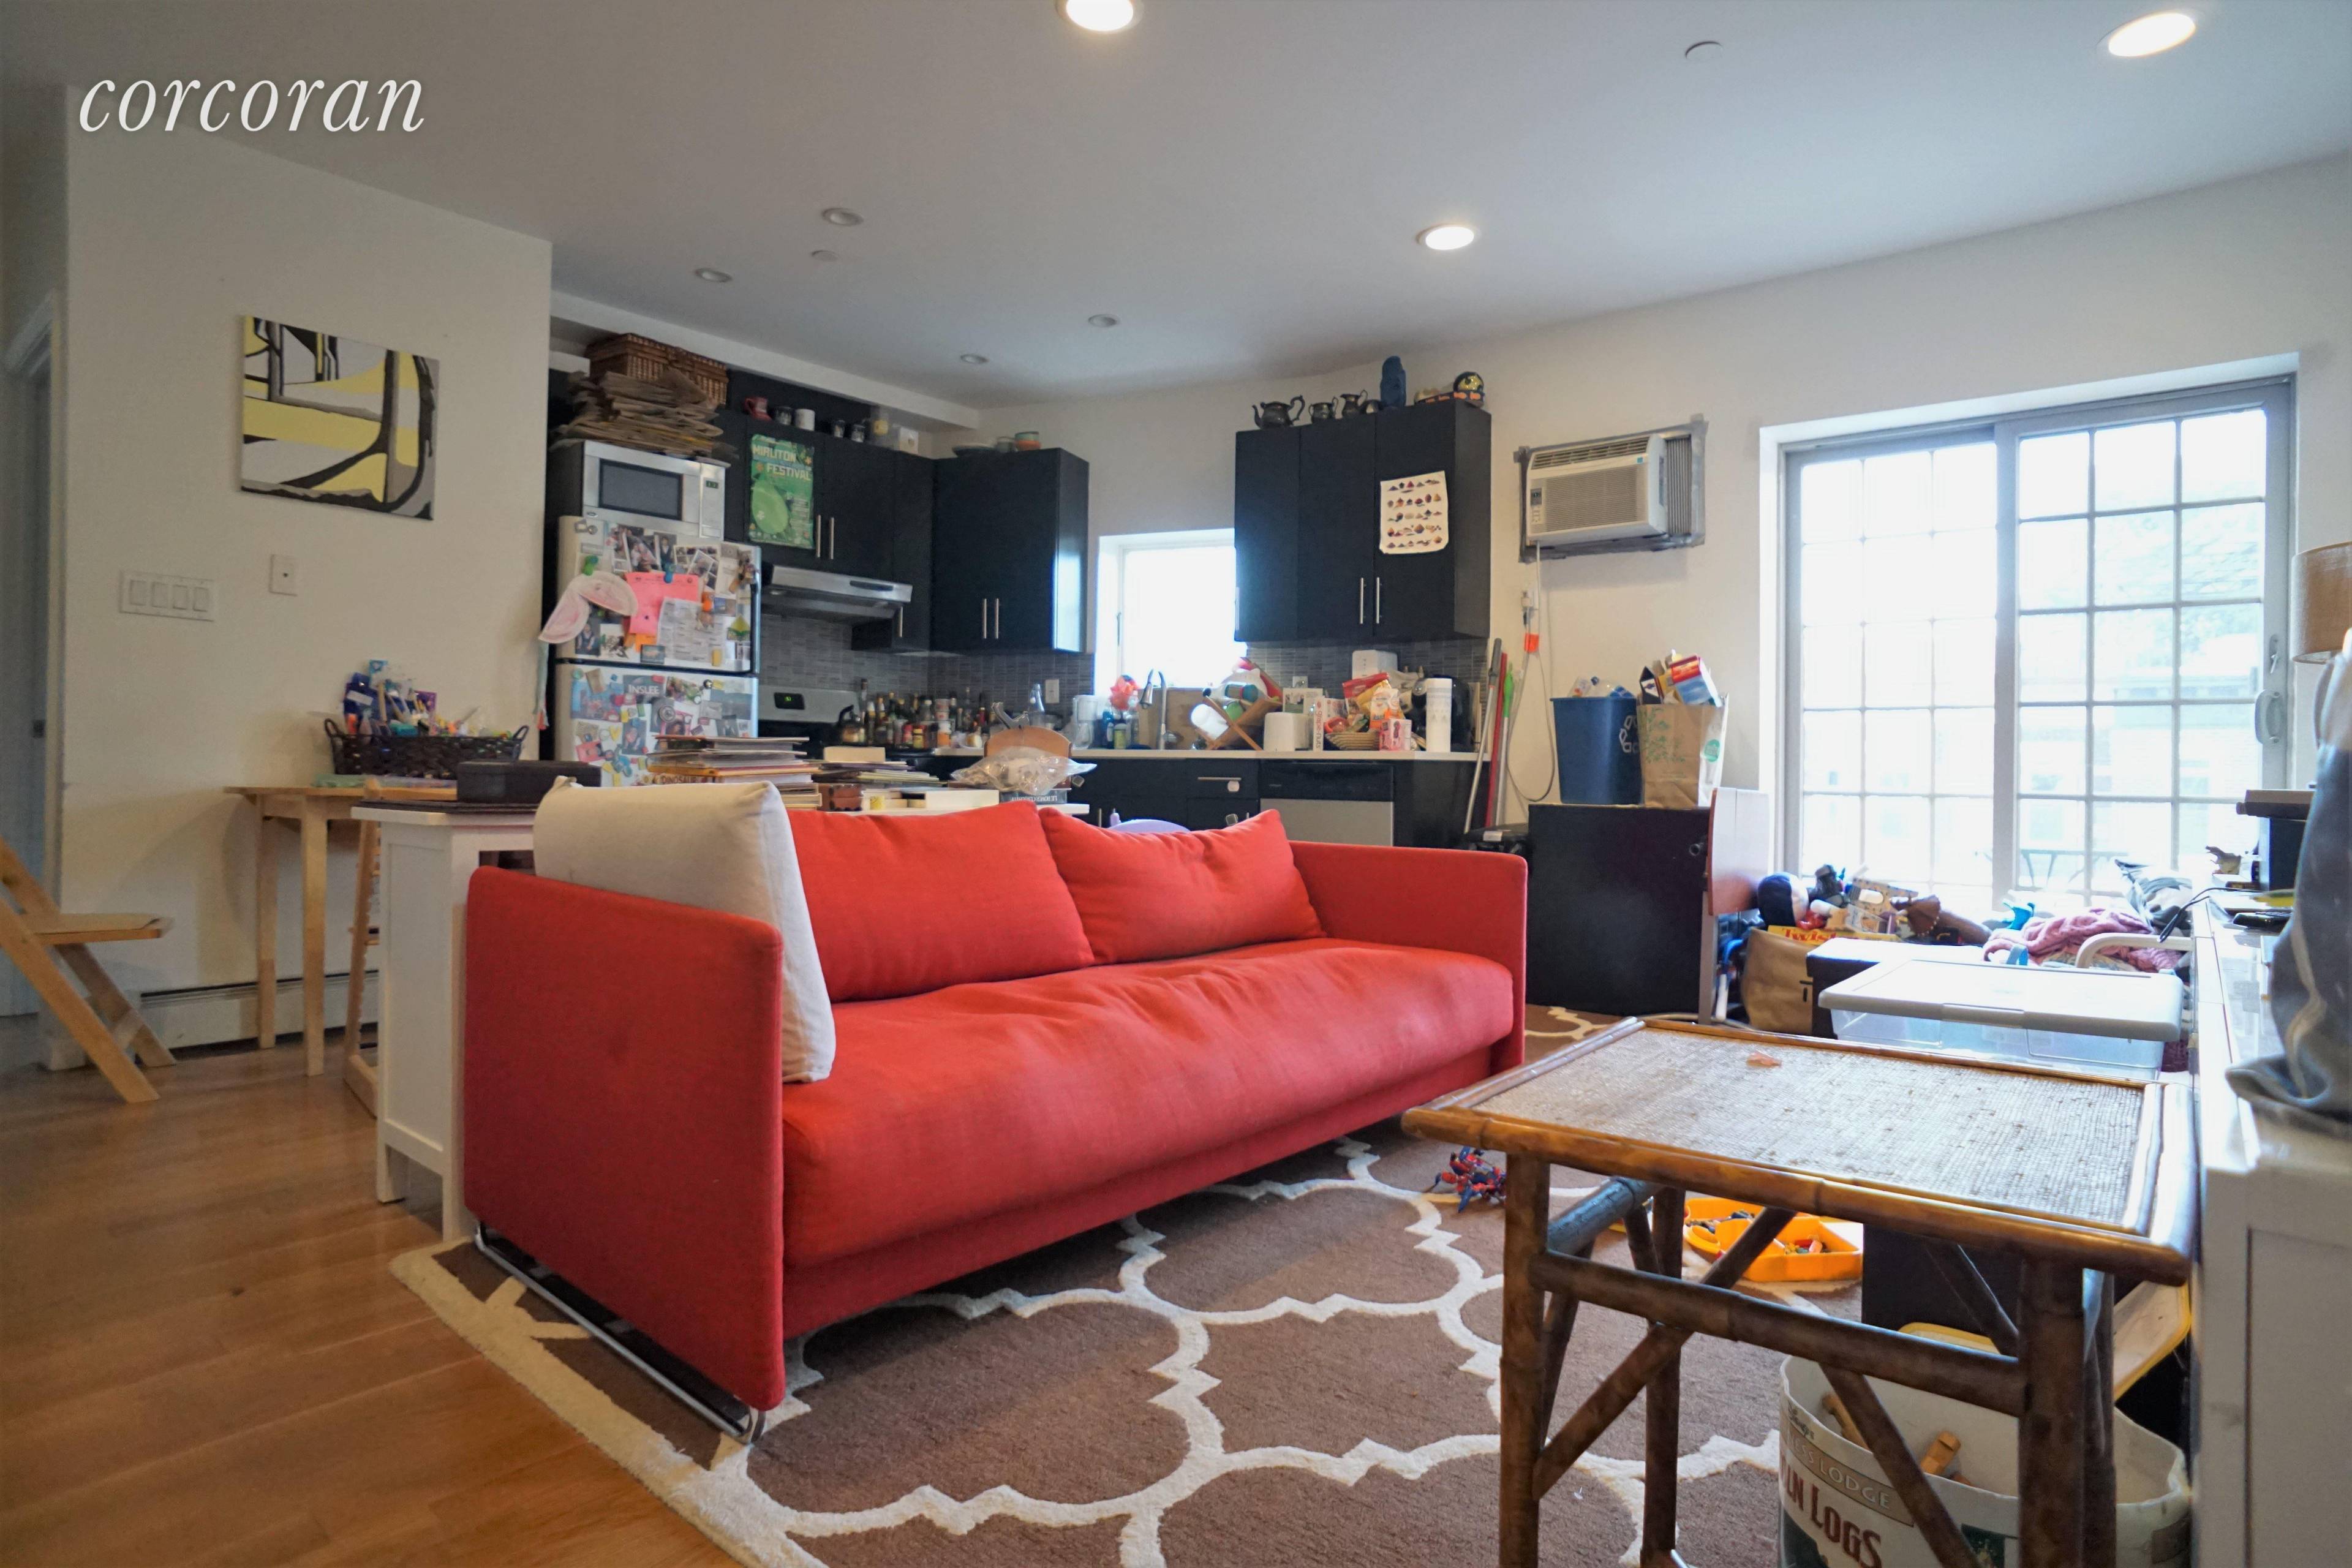 Large, Bright 2BD with Two Balconies, Modern Kitchen with Dishwasher and Through Wall AC's in an Elevator Building with Laundry, Storage and Rooftop Terrace This beautifully laid out 2BD apartment ...